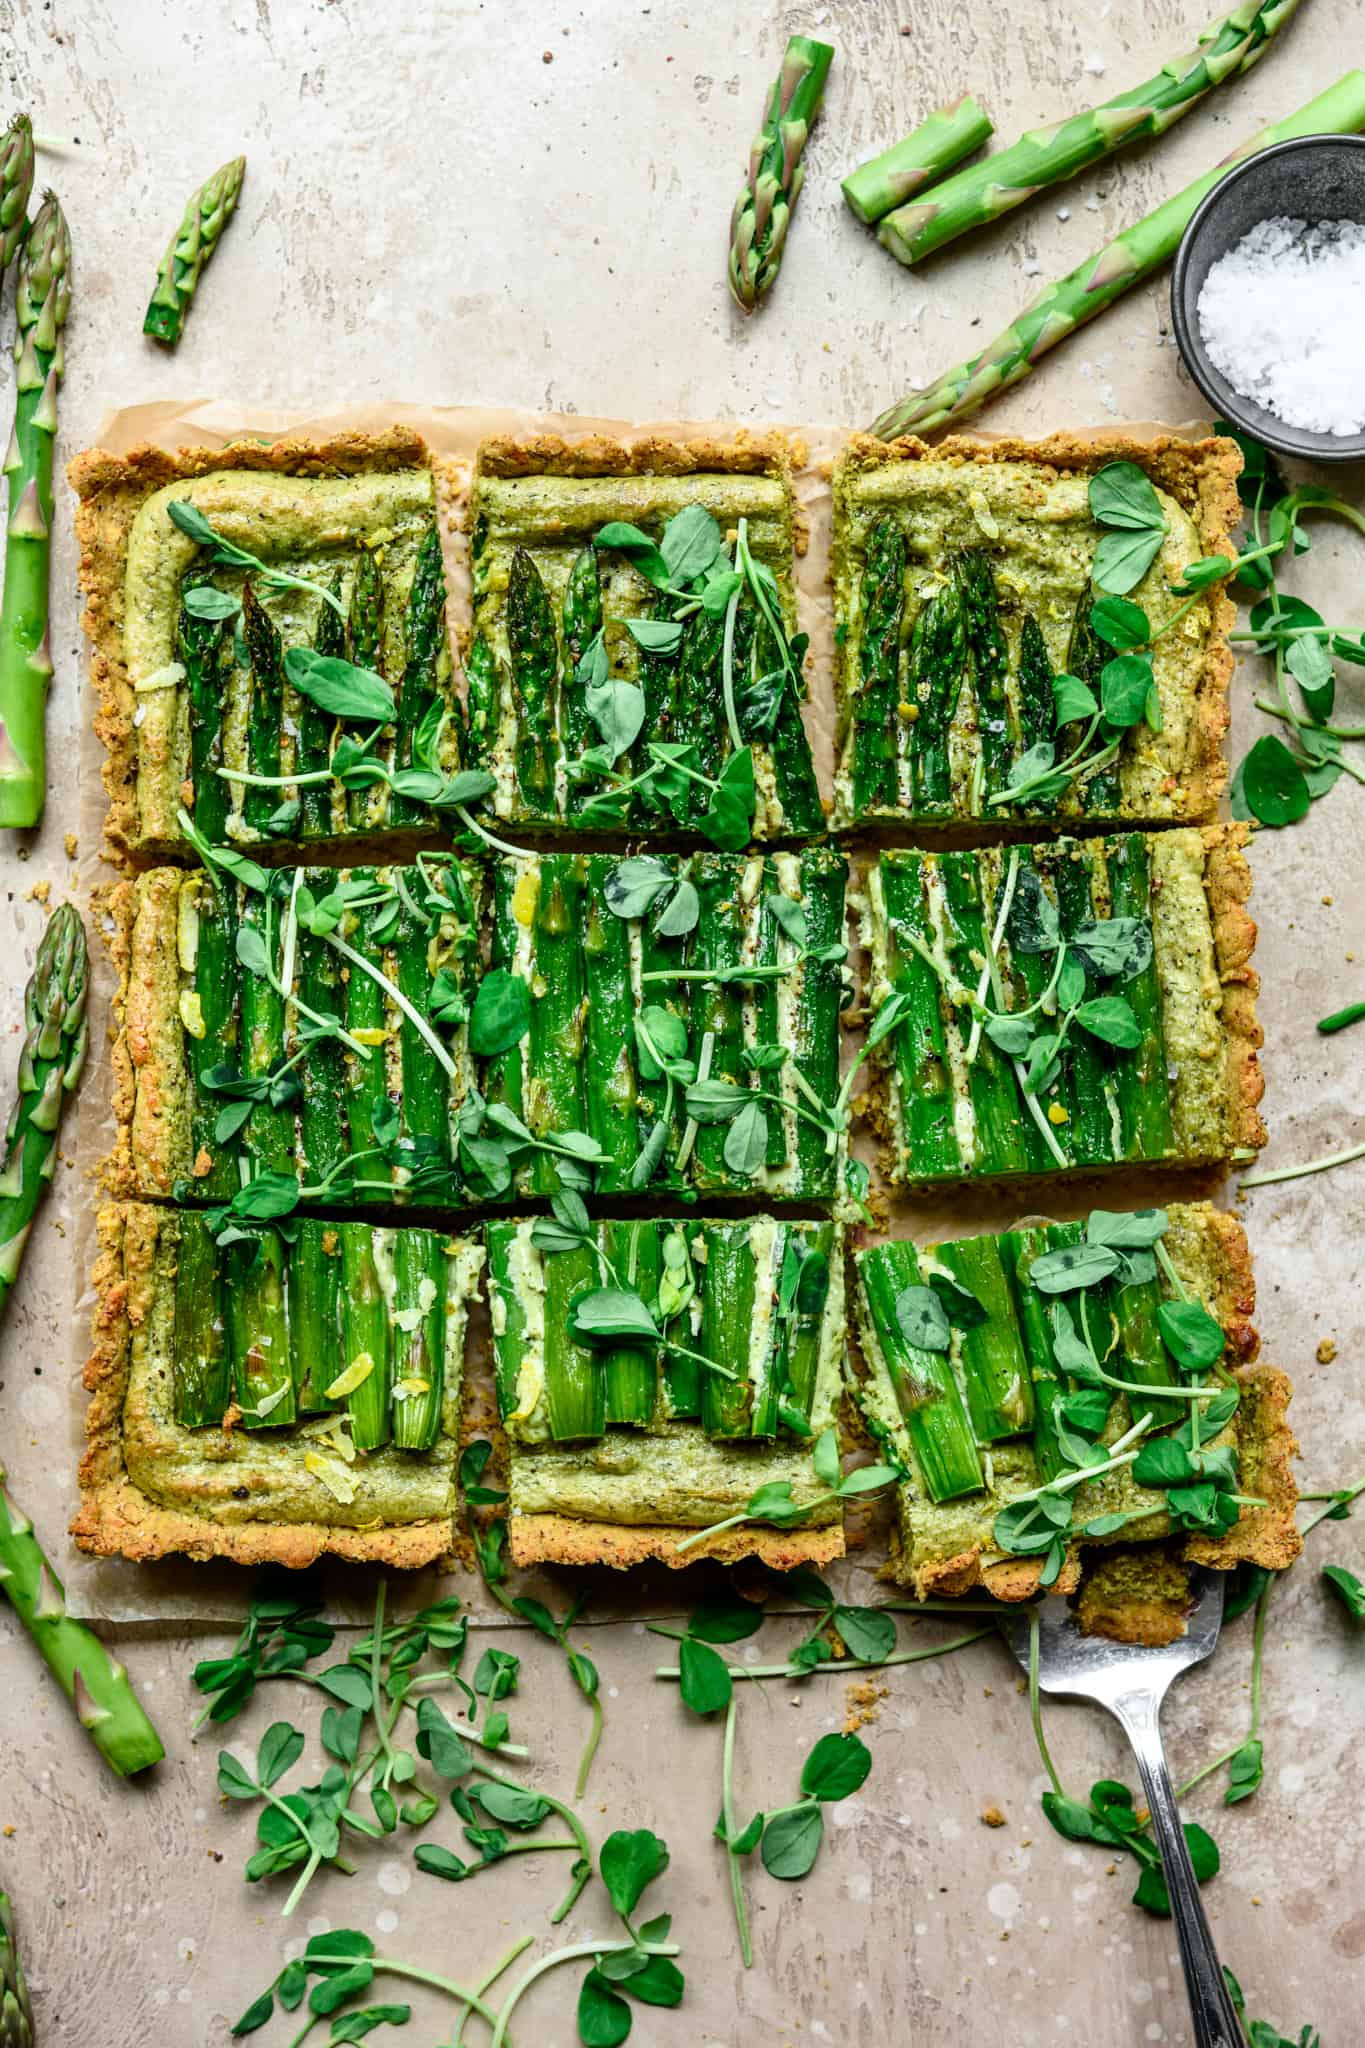 Overhead view of vegan ricotta and asparagus tart with a cornmeal crust sliced into squares on light tan background